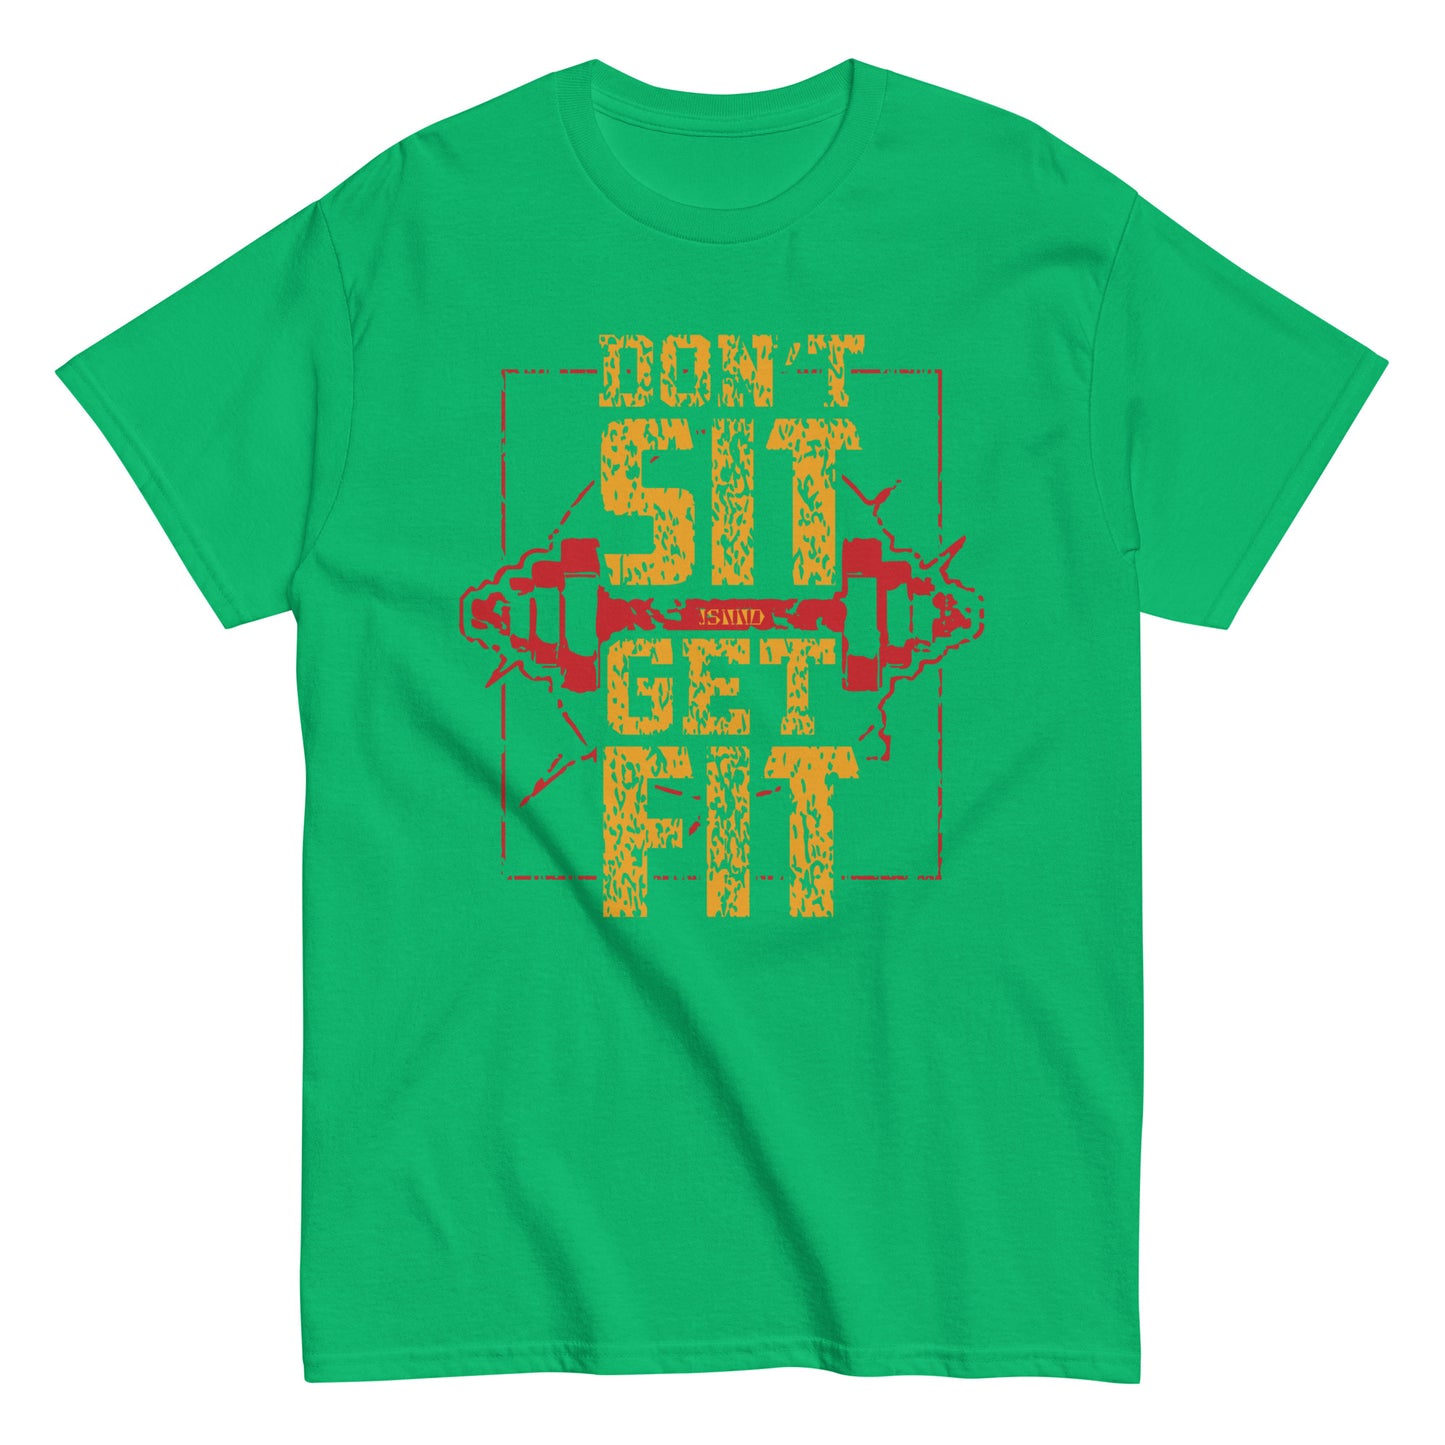 Get-fit classic tee